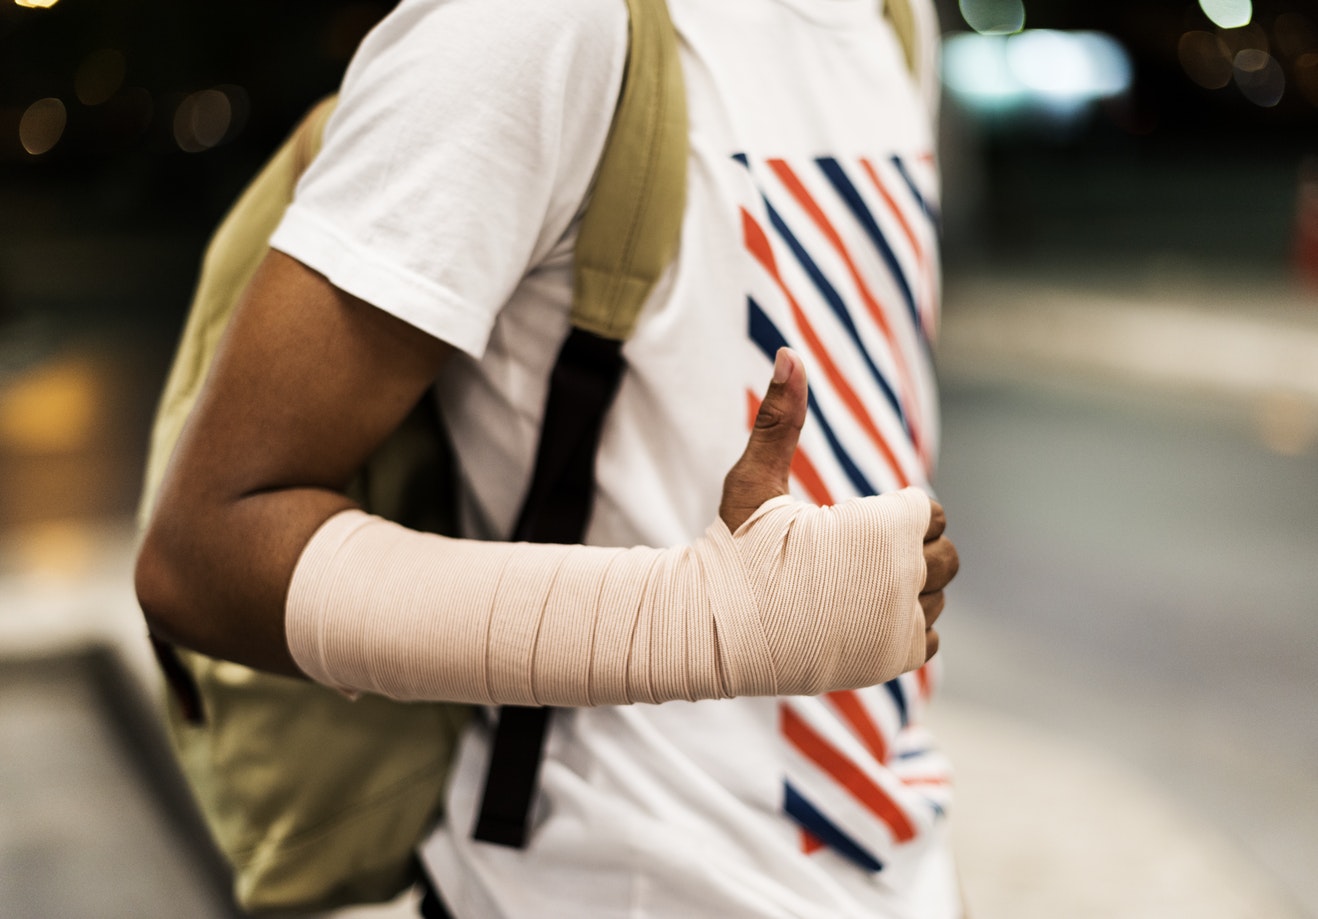 Accident & Injury Insurance Cover